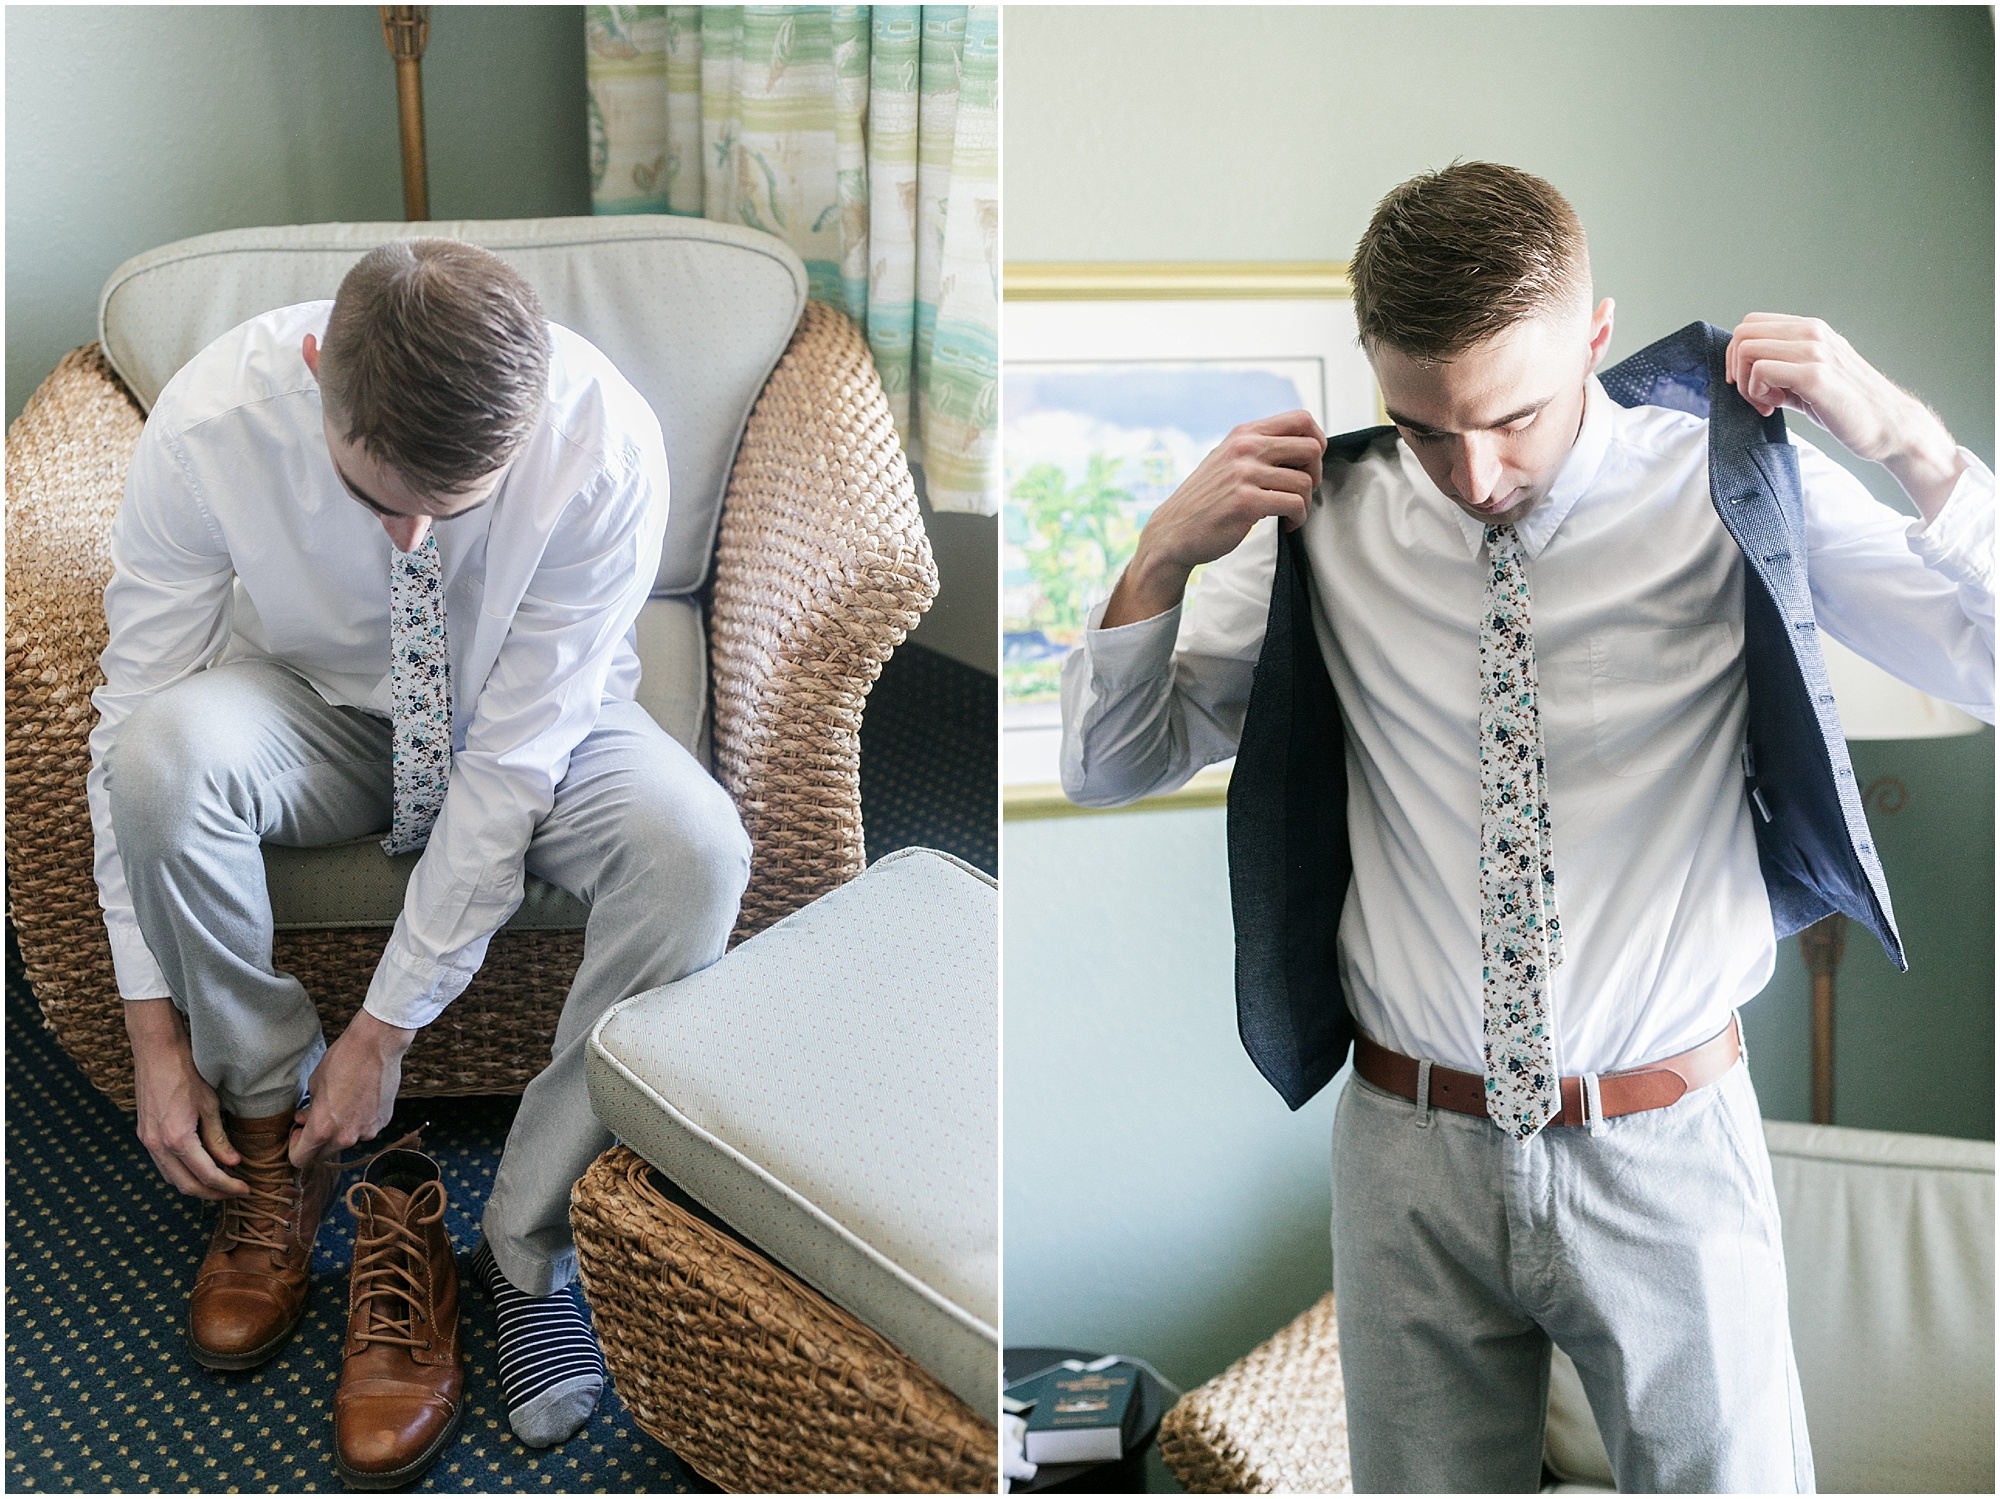 Groom putting on his shoes and vest.